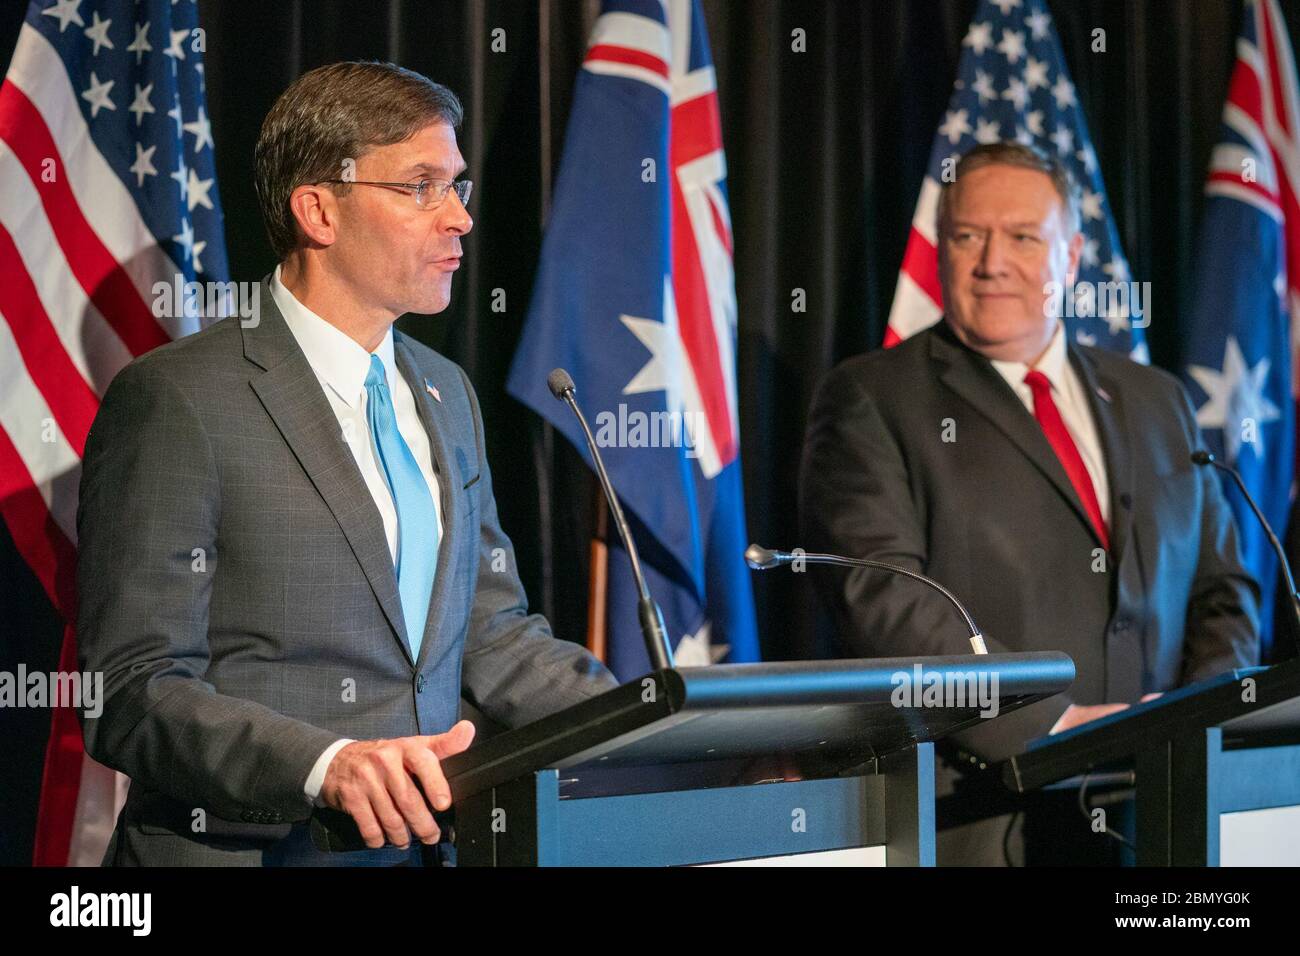 Secretary Pompeo Participates in a Joint Press Conference U.S. Secretary of State Michael R. Pompeo participates in a joint press conference with Australian Foreign Minister Marise Payne, Australian Defence Minster Linda Reynolds, and U.S. Secretary of Defense Mark Esper in Sydney, Australia on August 4, 2019. Stock Photo